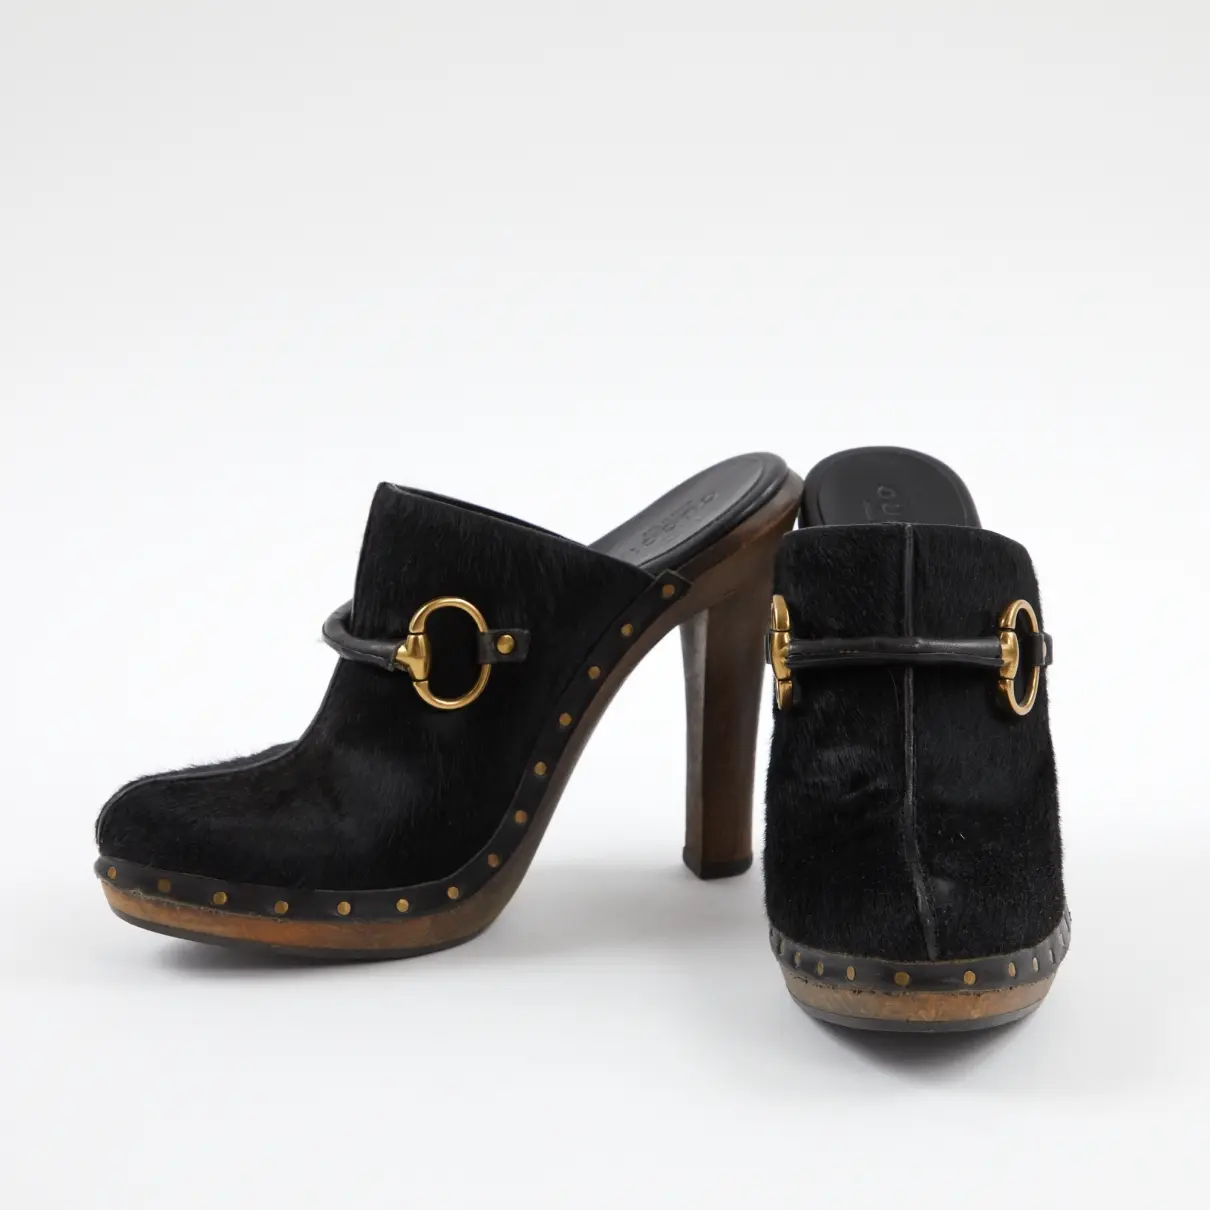 Gucci Pony-style calfskin mules & clogs for sale